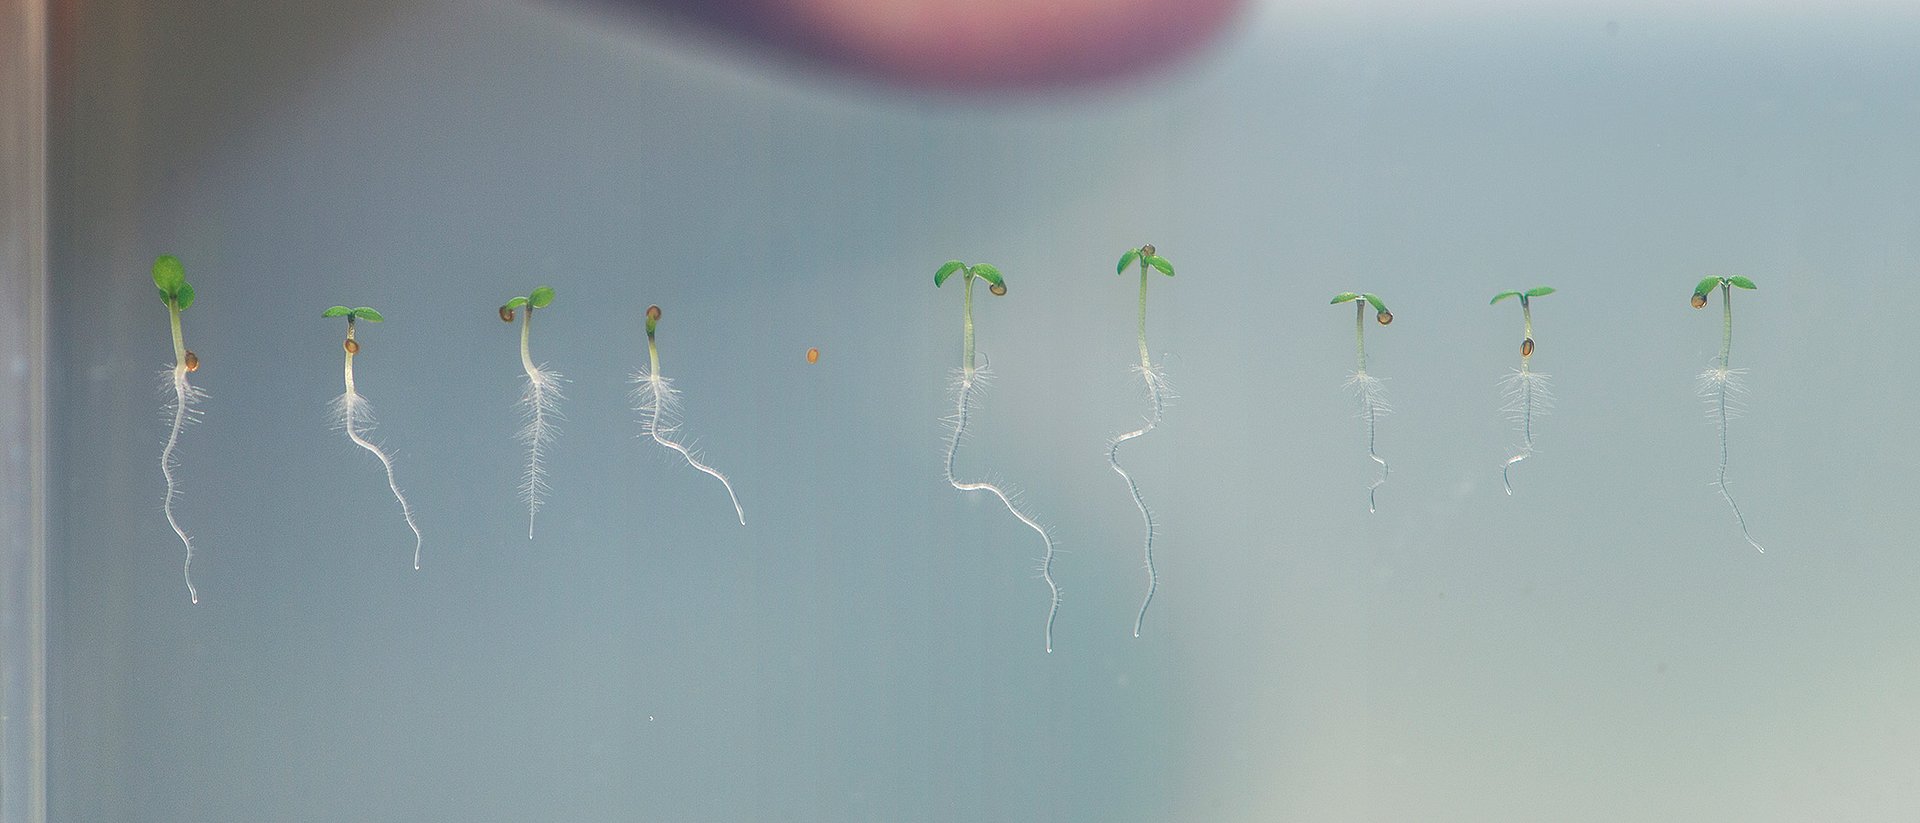 Seedlings of thale cress (Arabidopsis). The KAI2 protein regulates essential functions of root and root hair growth.